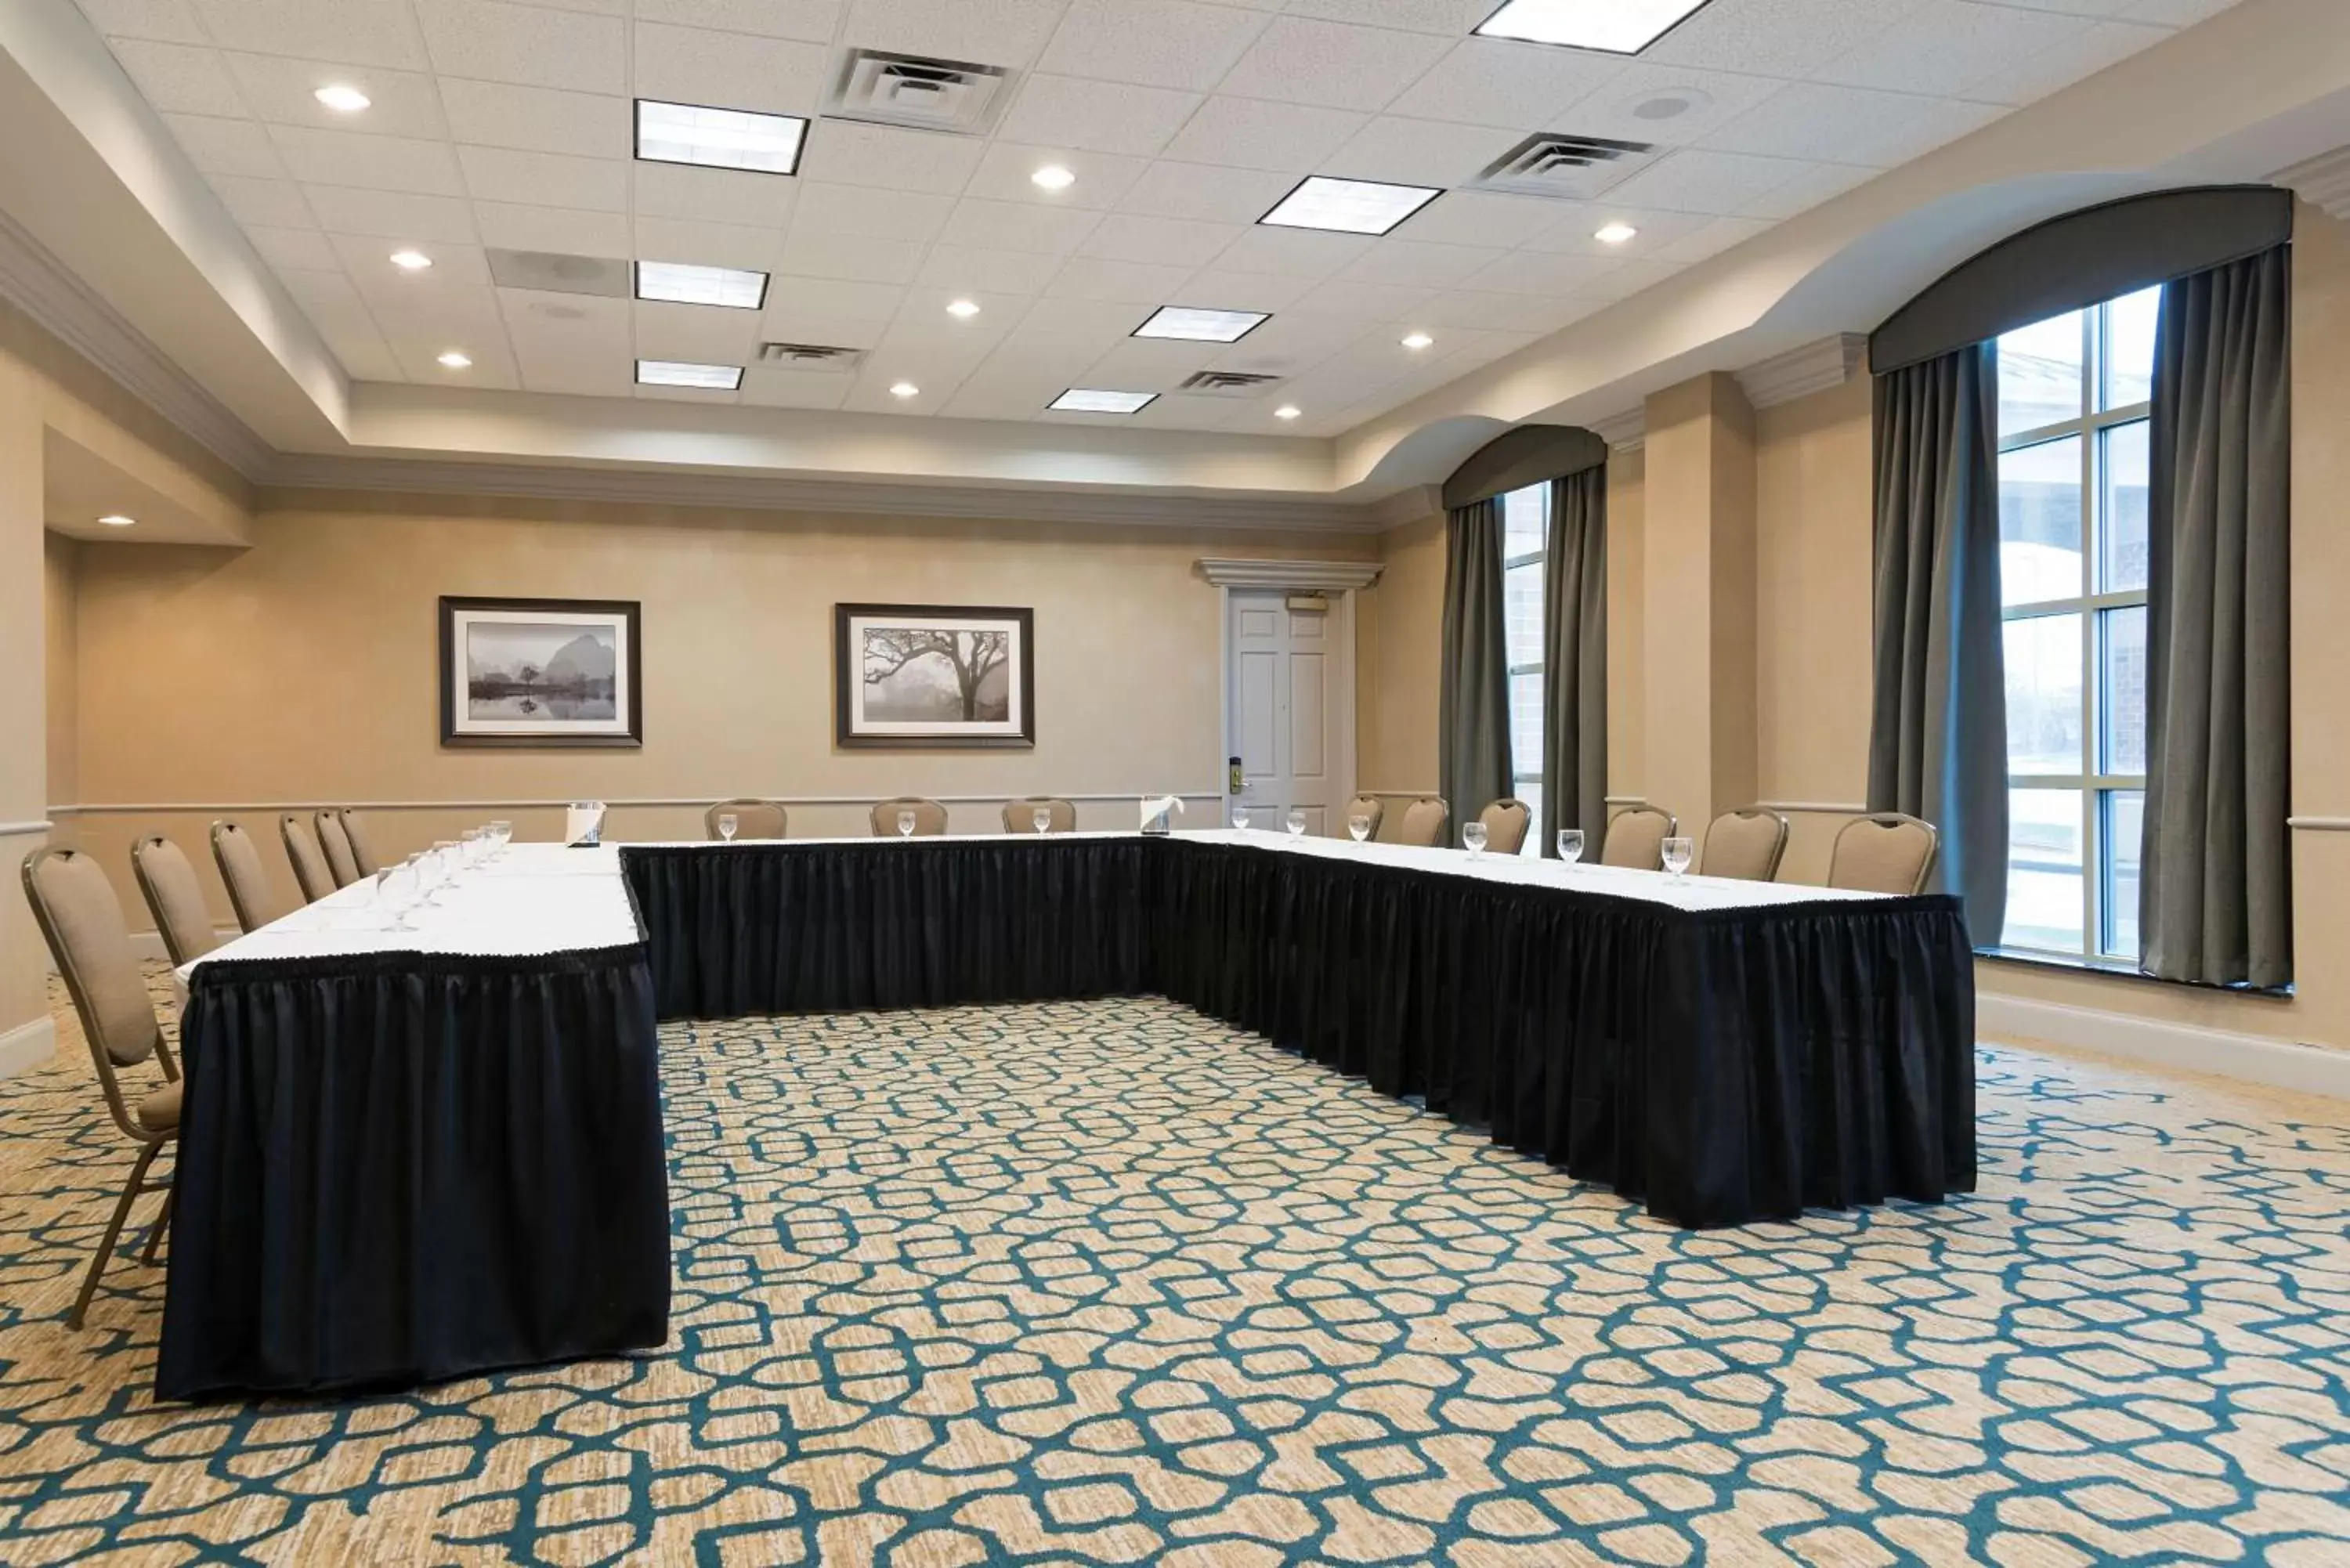 Meeting/conference room in Doubletree by Hilton Pleasant Prairie Kenosha, WI